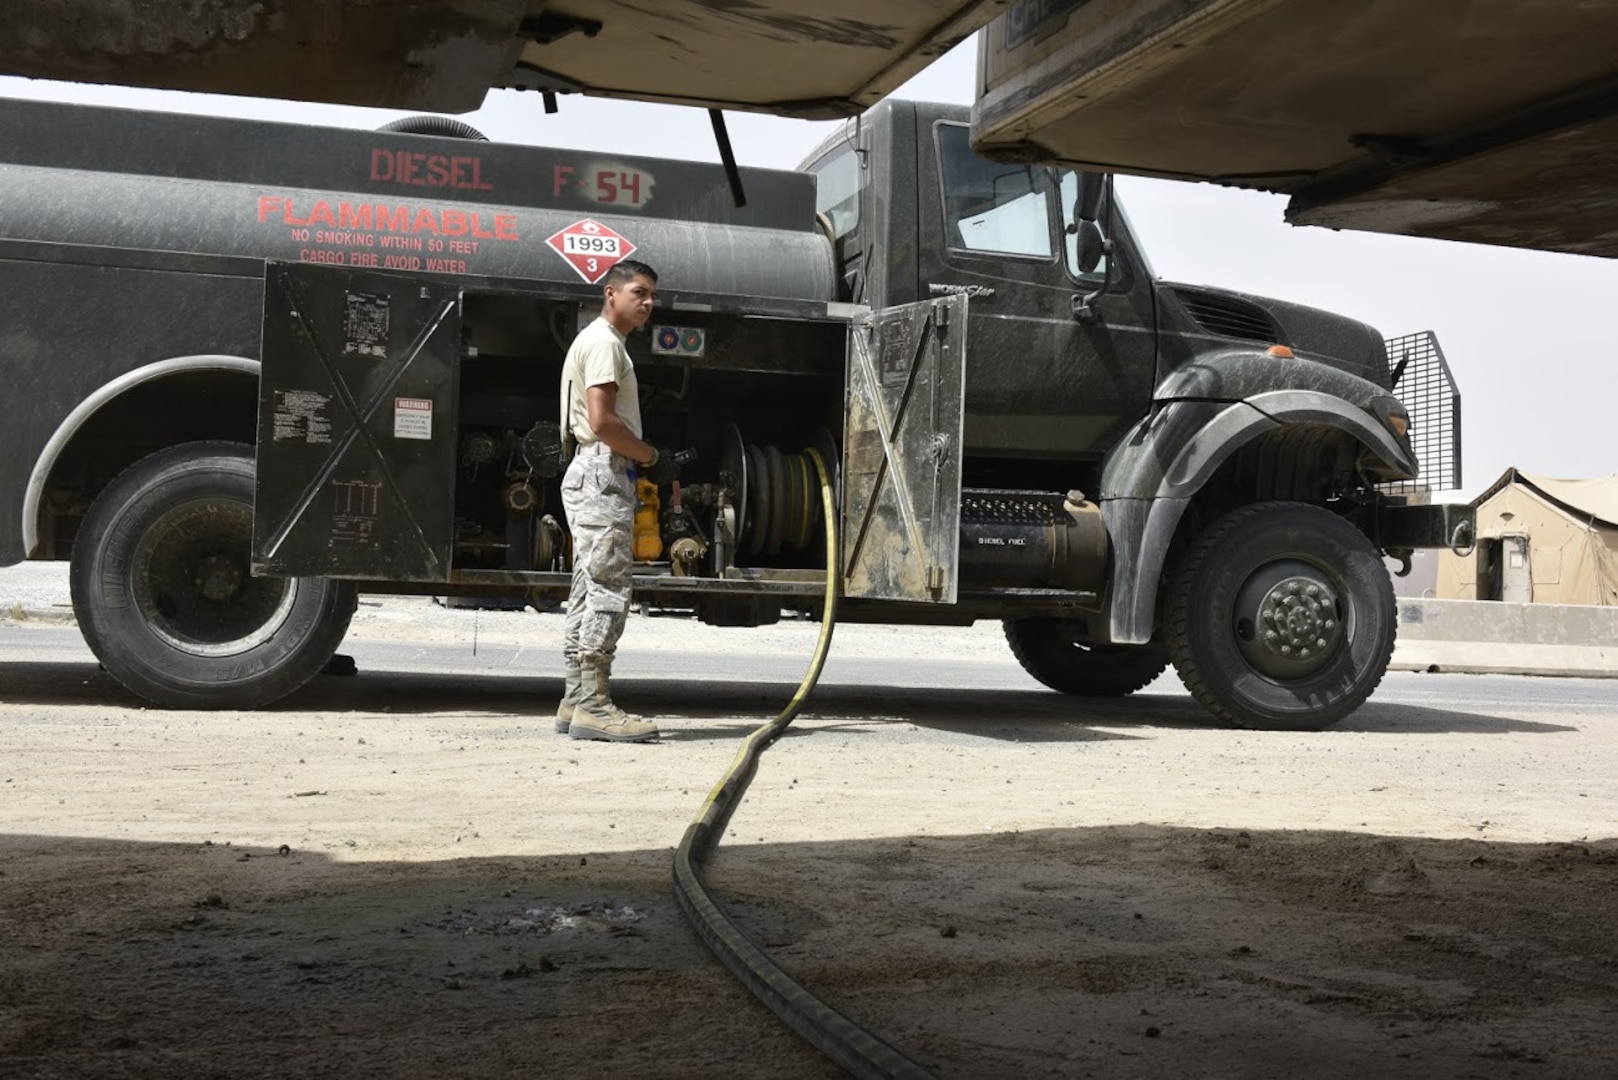 Senior Airman Adrian Alegria-Vasquez, 407th Expeditionary Logistic Readiness Squadron petroleum, oil and lubricants flight fuel distribution operator, monitors a customer pumping diesel May 10, 2017, in Southwest Asia. Fuel technicians maintain all POL substances, from diesel and gasoline to jet fuel and liquid oxygen. These materials play a vital role in delivering airpower to the fight against the ISIS. The team here at the 407th Air Expeditionary Group supplies U.S. Marine Corps, Italian and Polish air forces. (U.S. Air Force photo by Senior Airman Ramon A. Adelan)